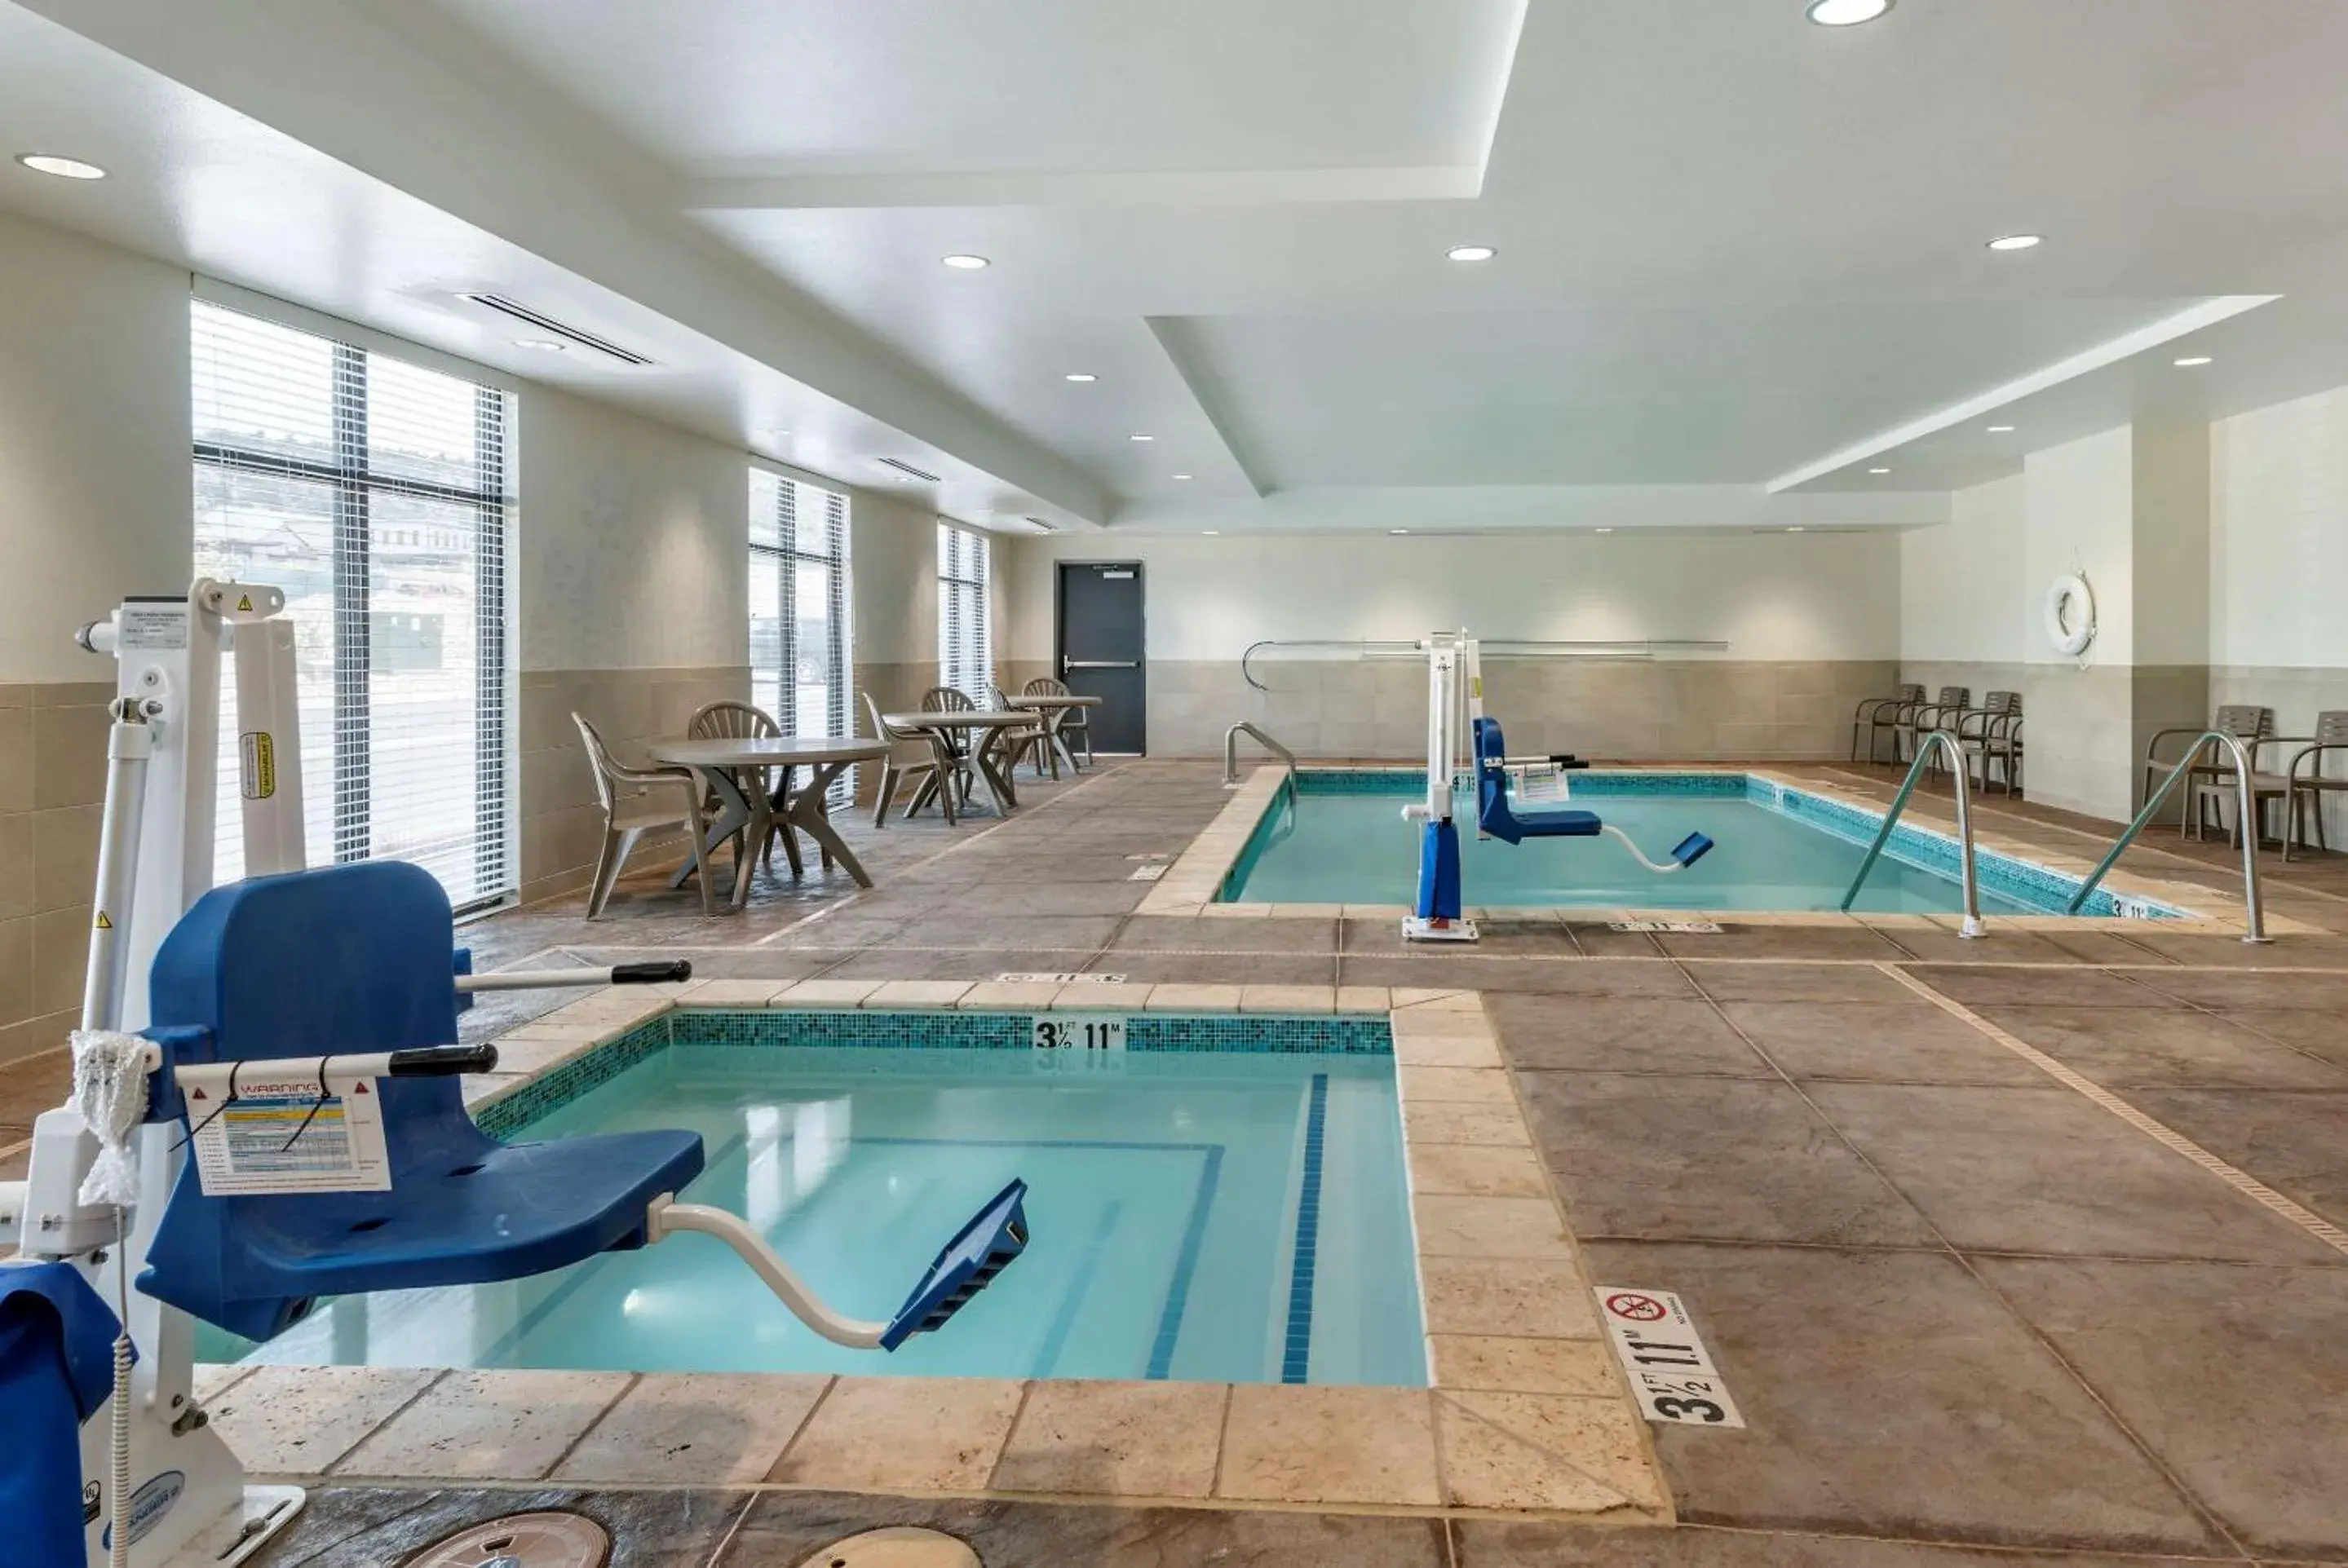 On site, Swimming Pool in MainStay Suites Durango